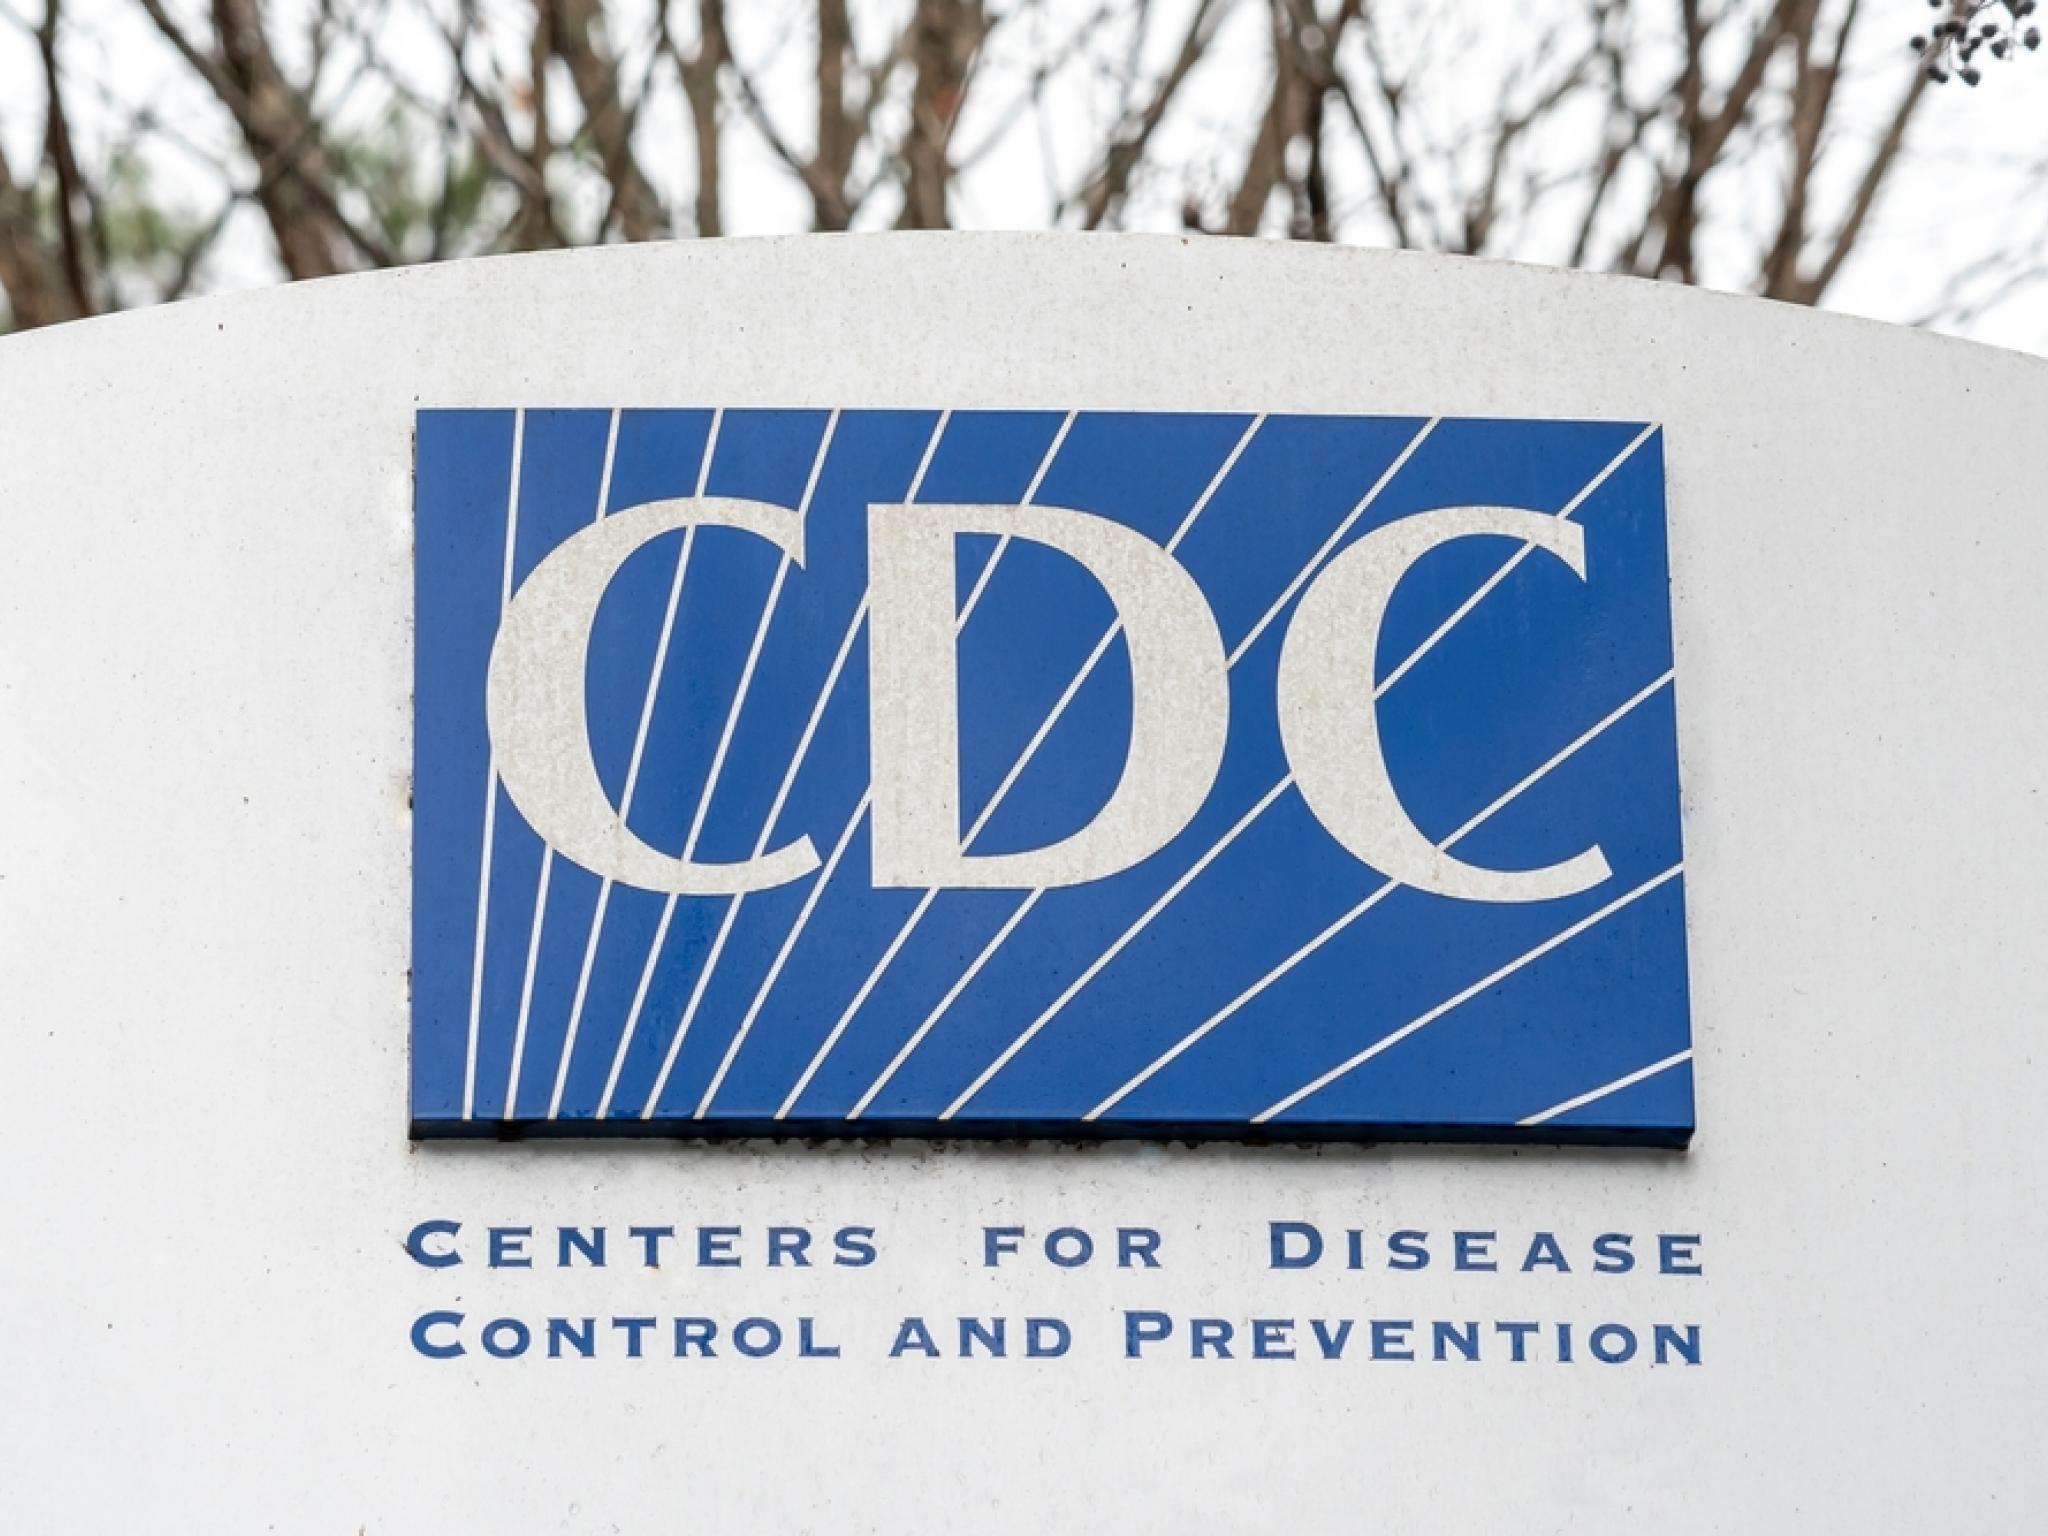  cdc-advisor-panel-recommends-rsv-shots-in-us-for-people-above-75-years-analyst-says-decision-negative-for-gsk 